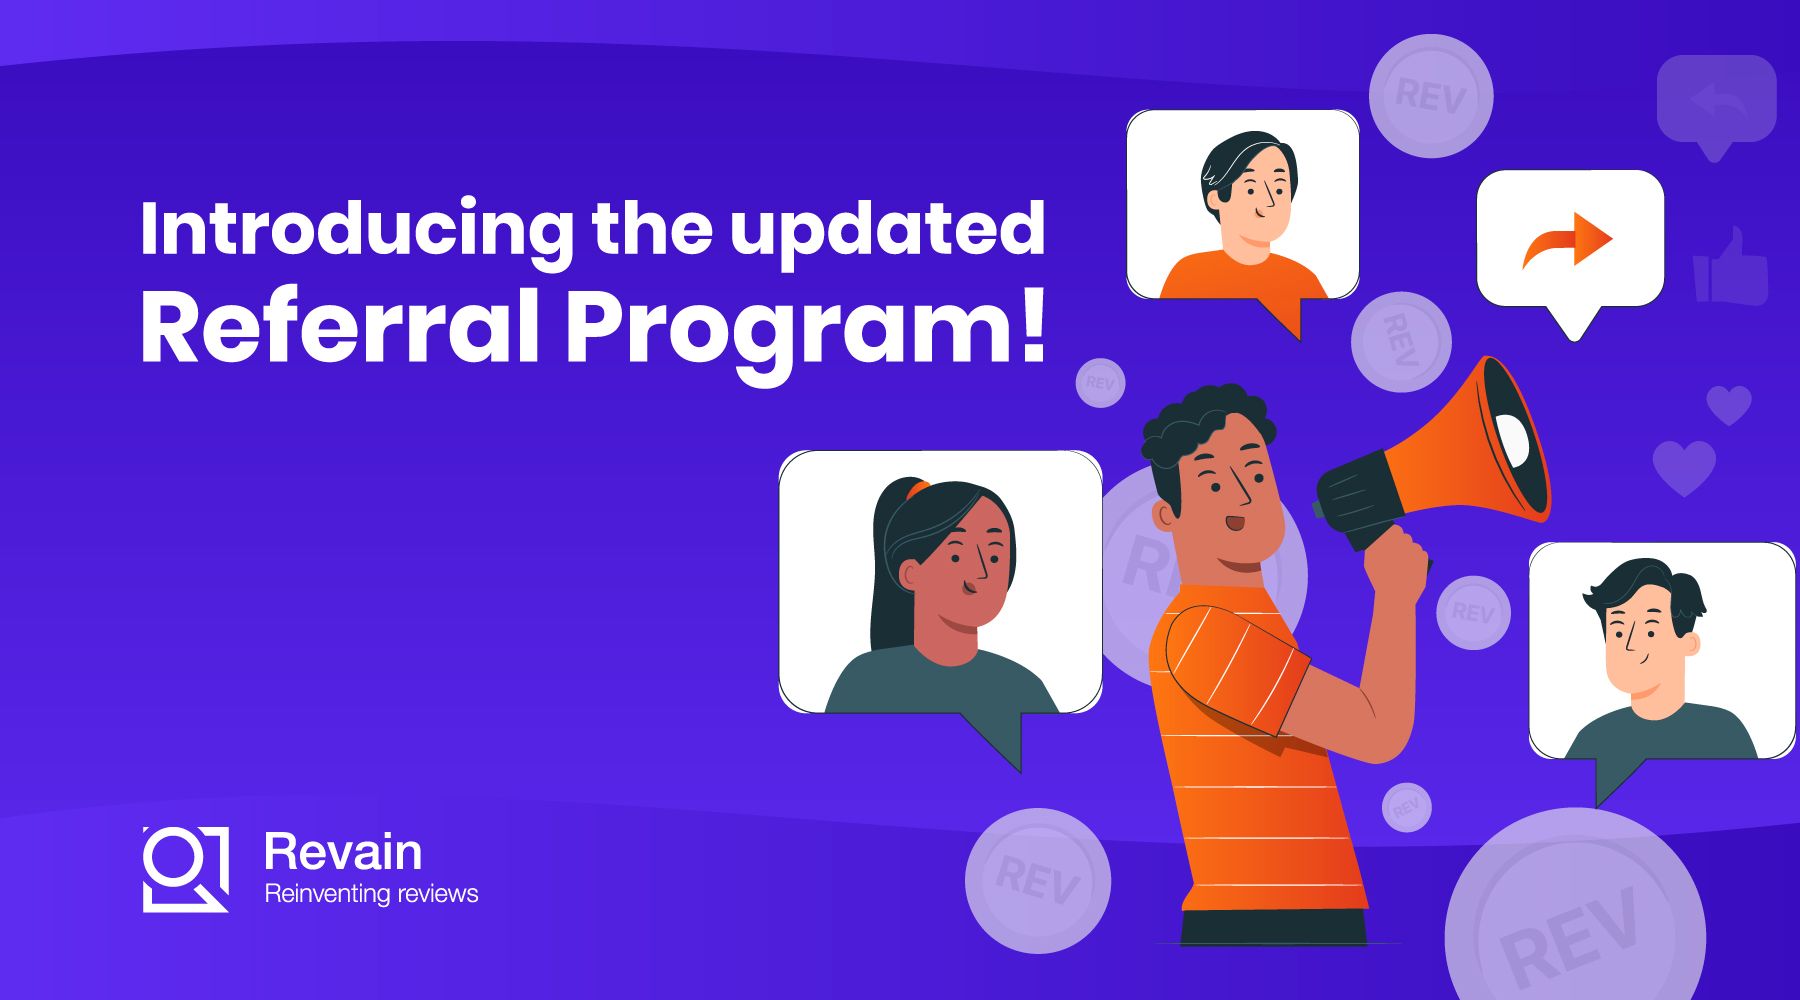 Introducing the updated Referral Program!